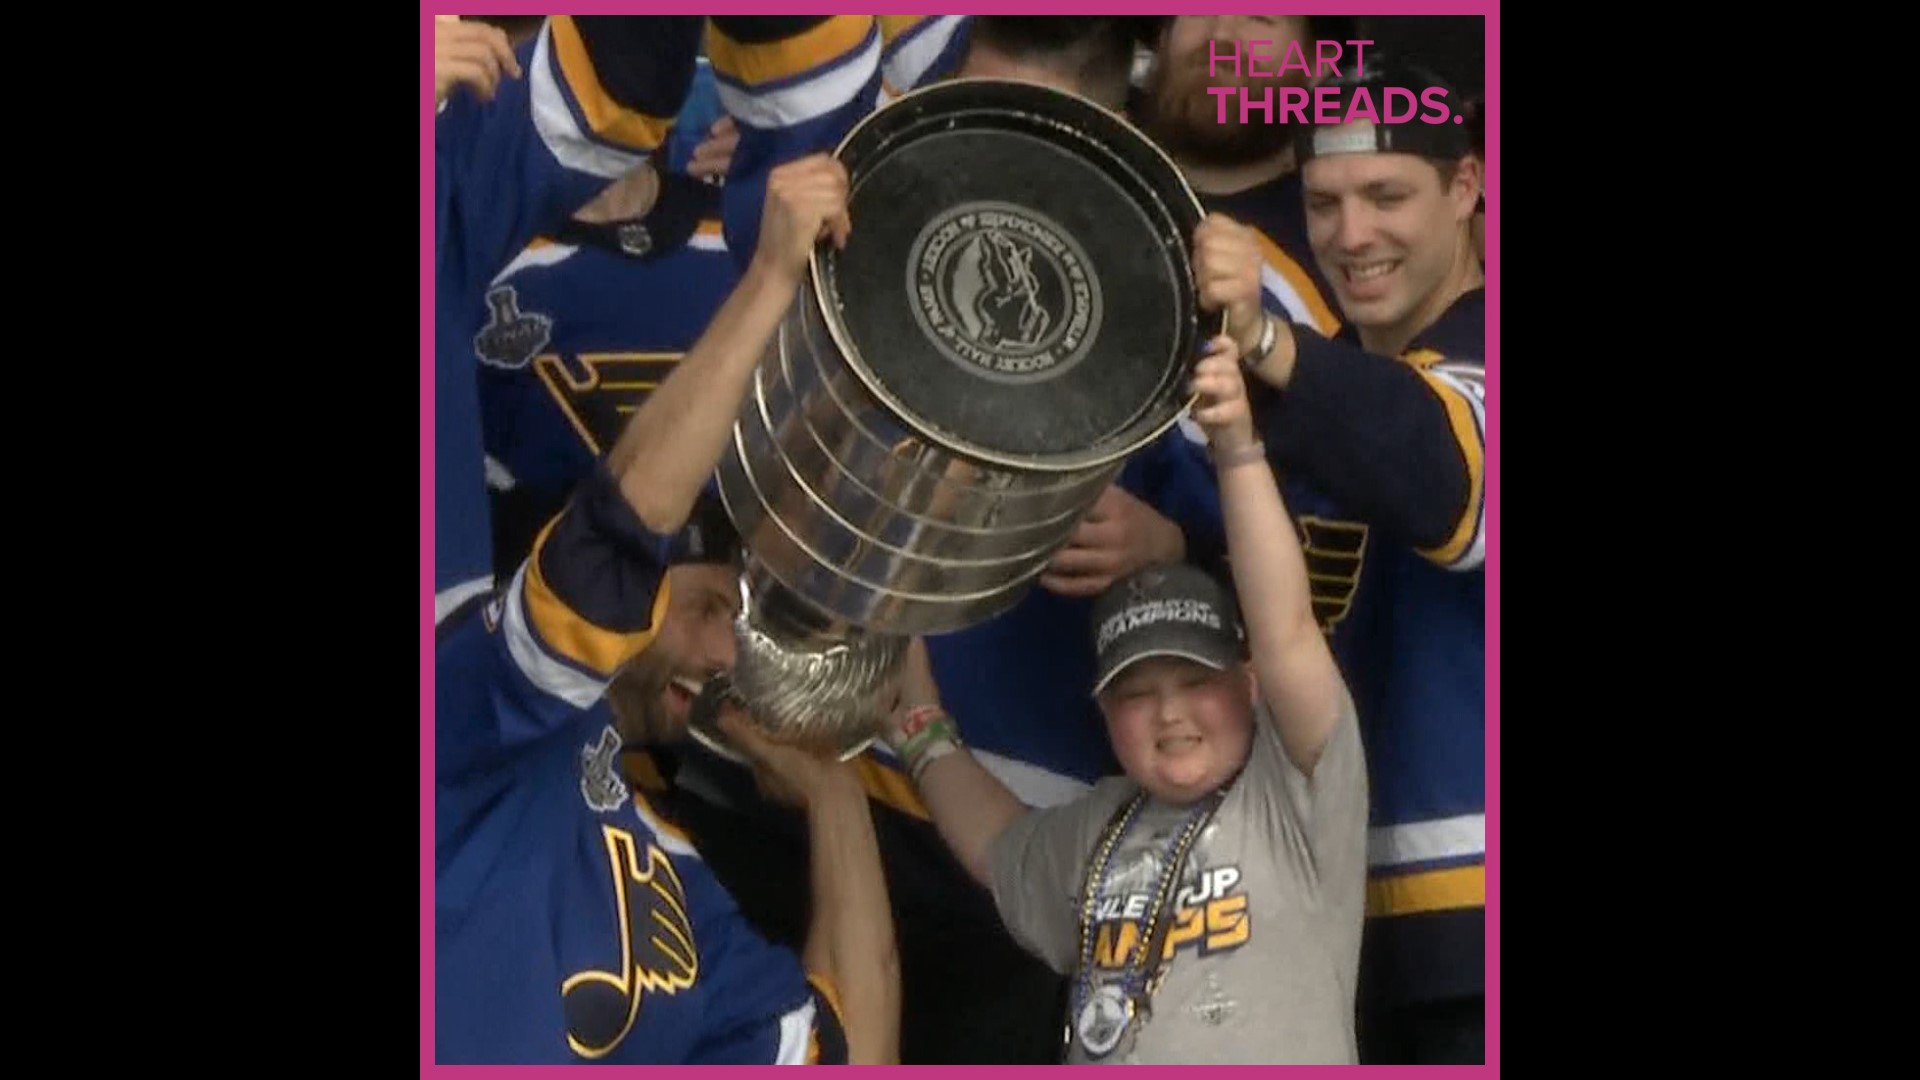 Laila Anderson, the girl who inspired a city with her brave battle against a rare disease, was enshrined in the Hockey Hall of Fame.